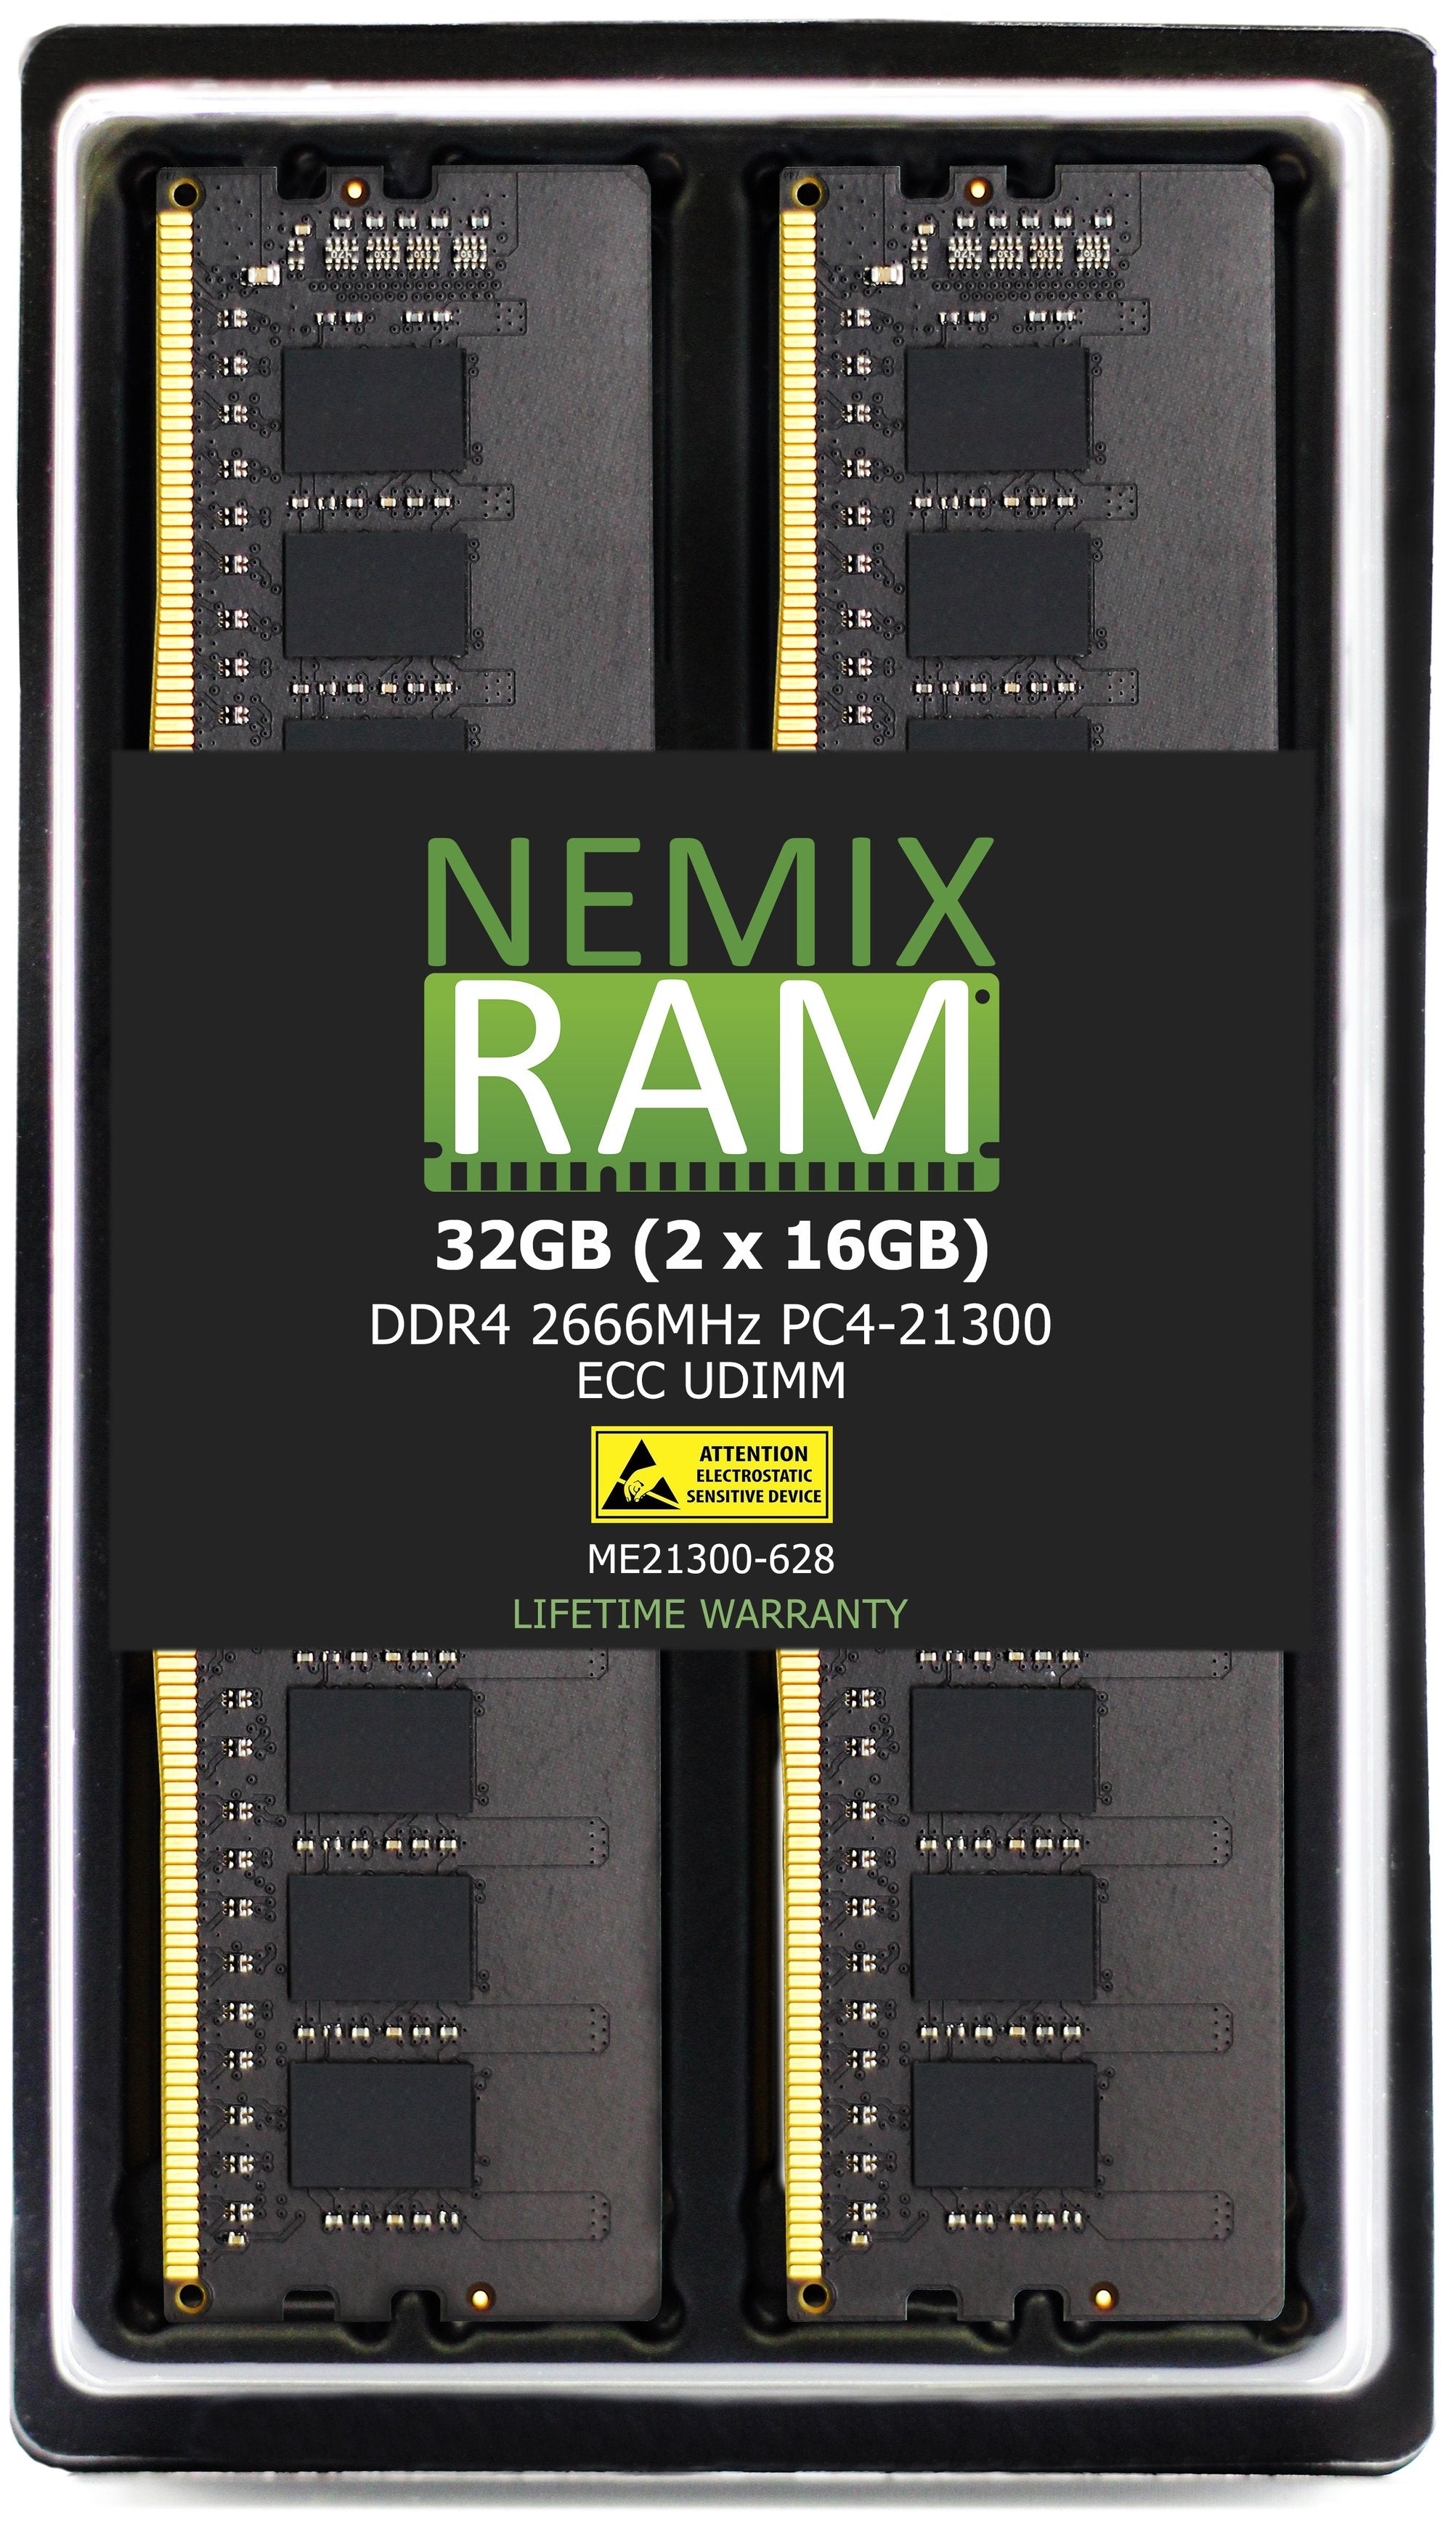 DDR4 2666MHZ PC4-21300 ECC UDIMM Compatible with Synology D4EC-2666-16G